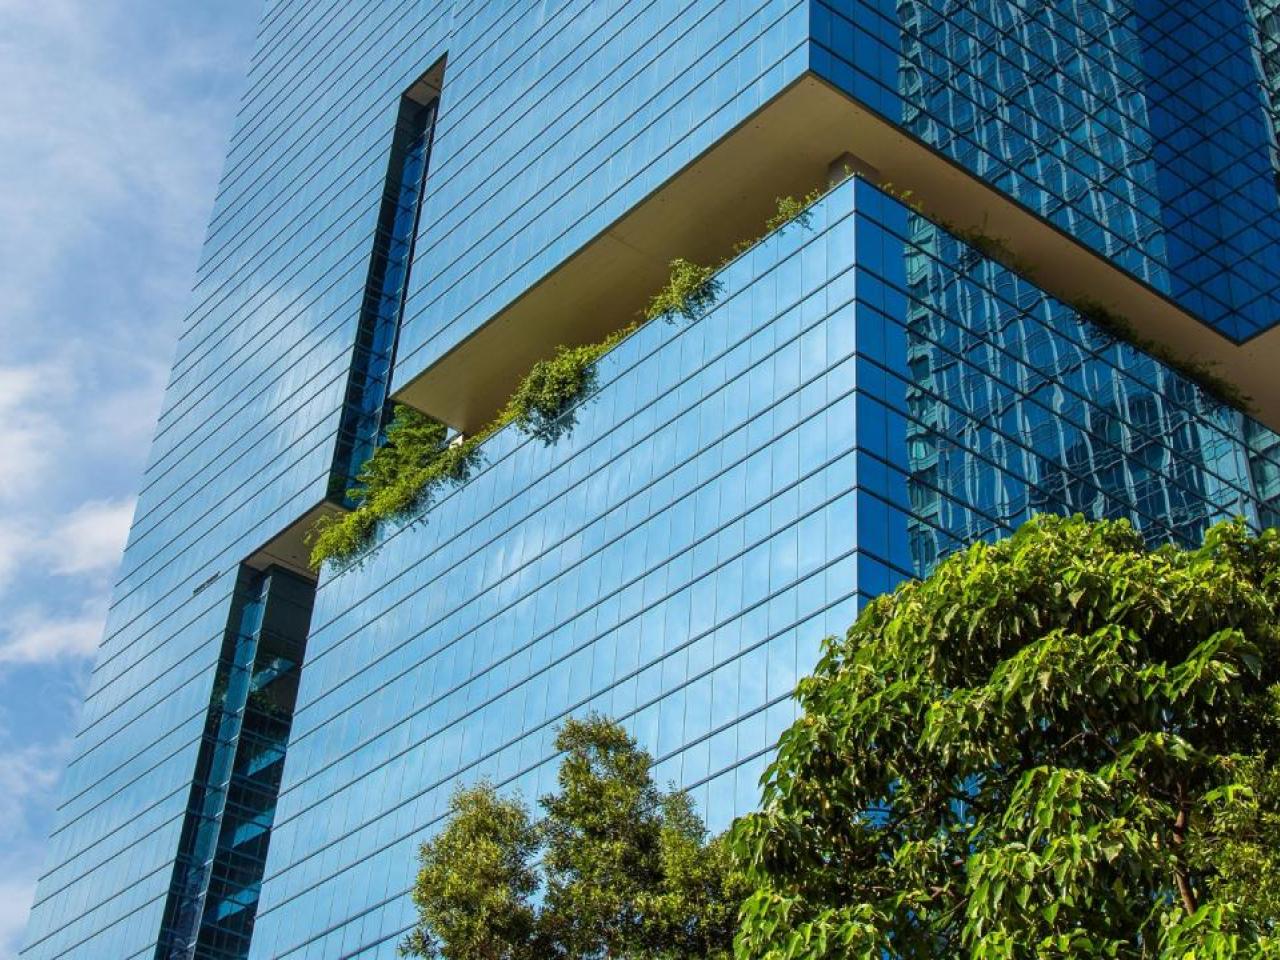 A tall office building and clouds in a blue sky behind it. Trees and plants in front and on a balcony near the middle of the building.